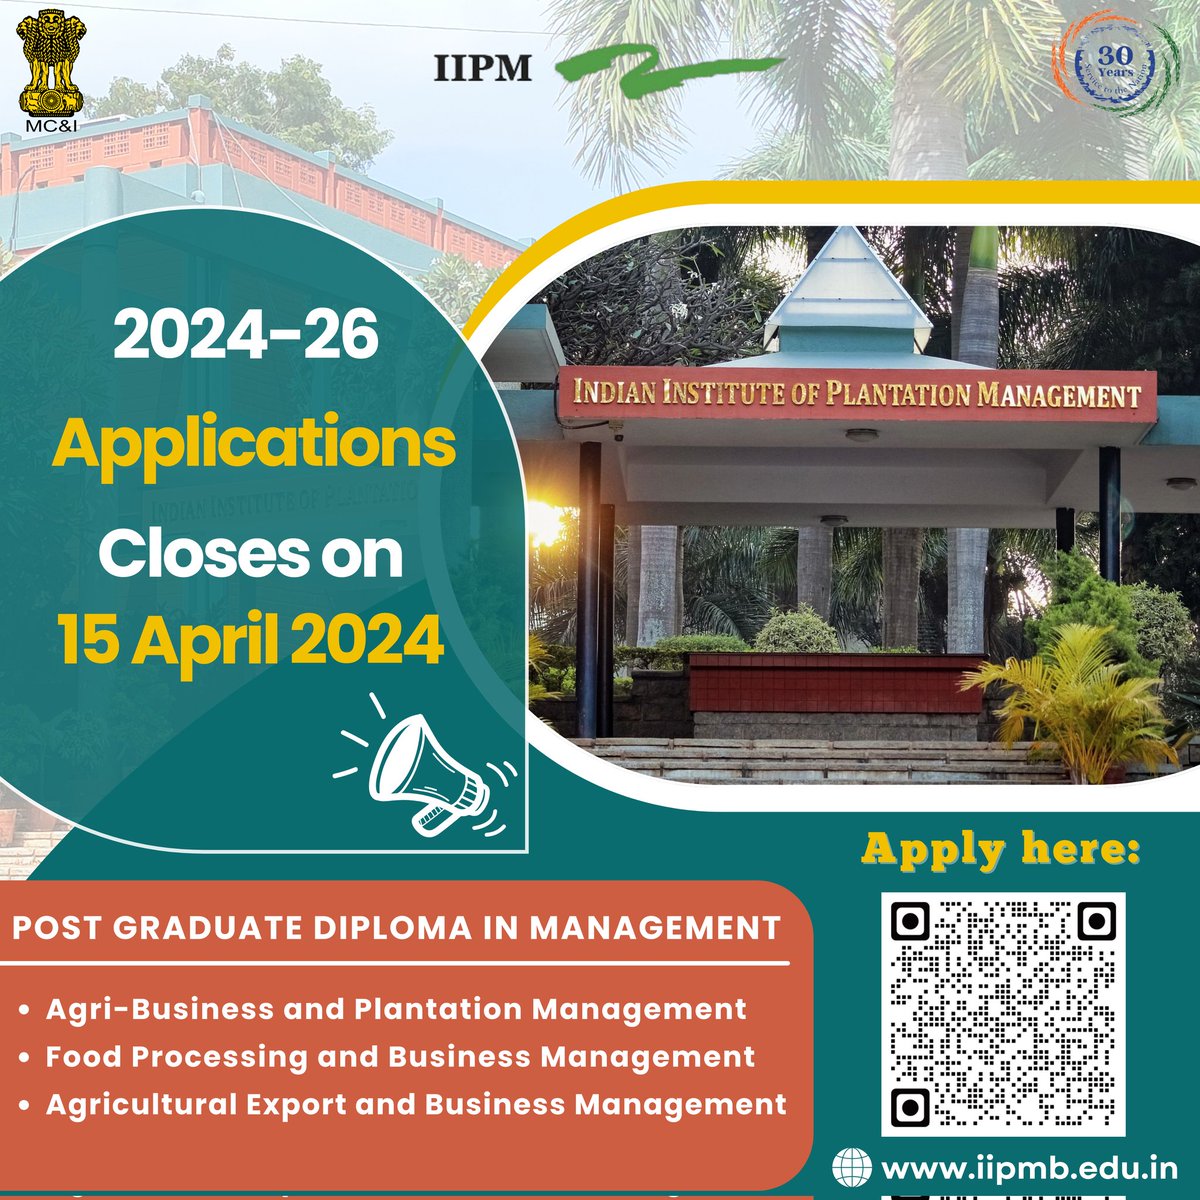 Hurry up! Only 3 days left to apply for the PGDM programs at IIPMB.

IIPMB seamlessly integrates academic excellence with practical knowledge to lift up your career journey.

Don't wait, take this chance now before it's gone!

#IIPMB1993 #iipmb #admissions #mbaapplications